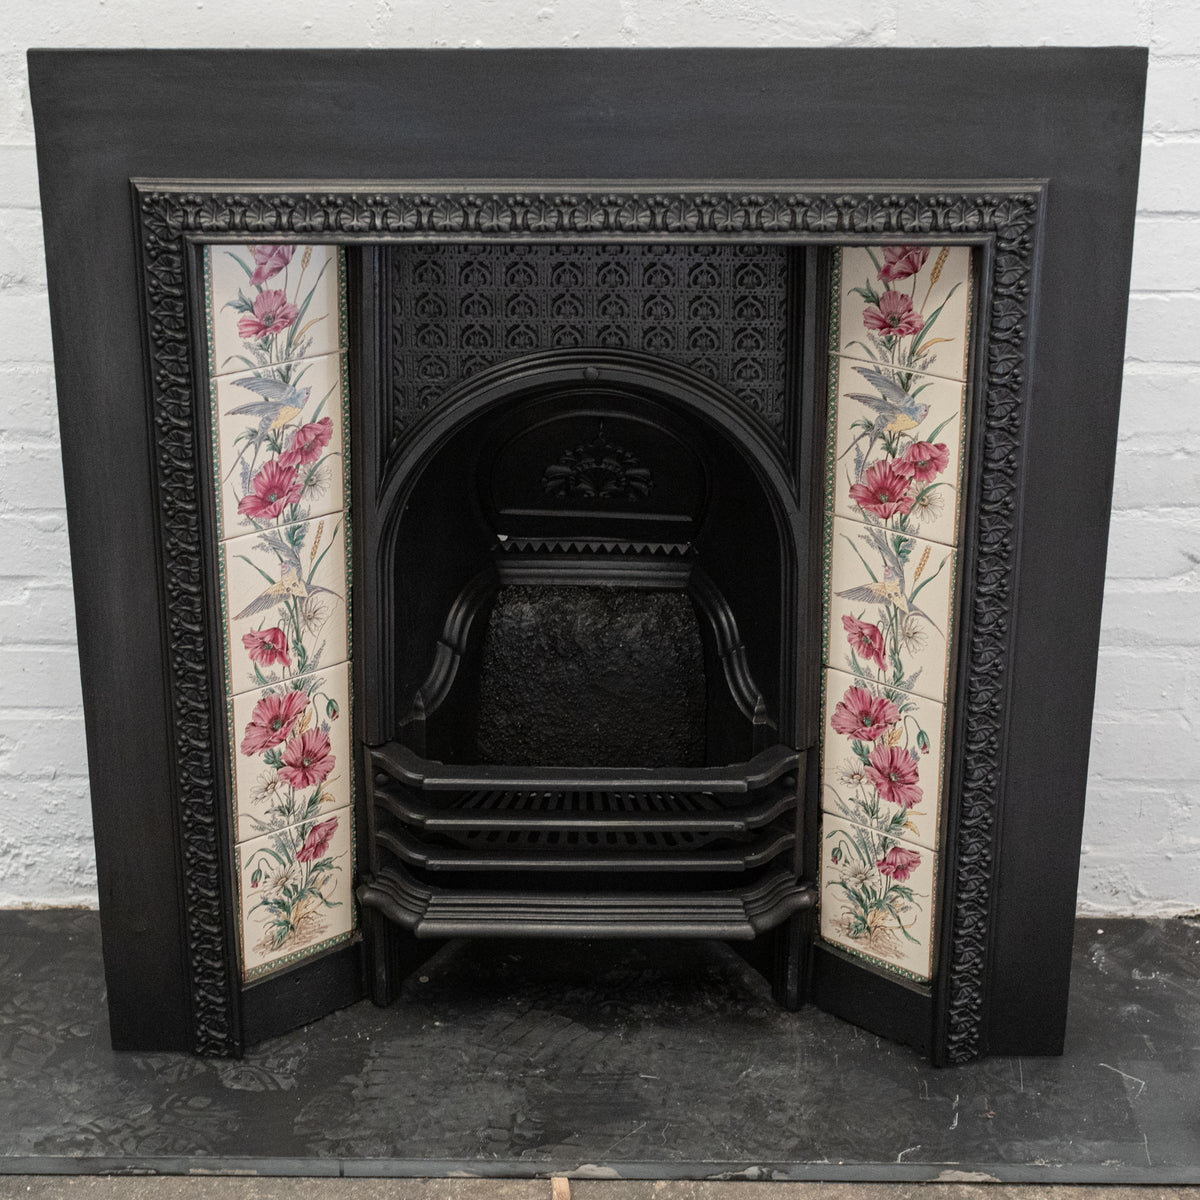 Antique Cast Iron Fireplace Insert With Floral Tiles | The Architectural Forum